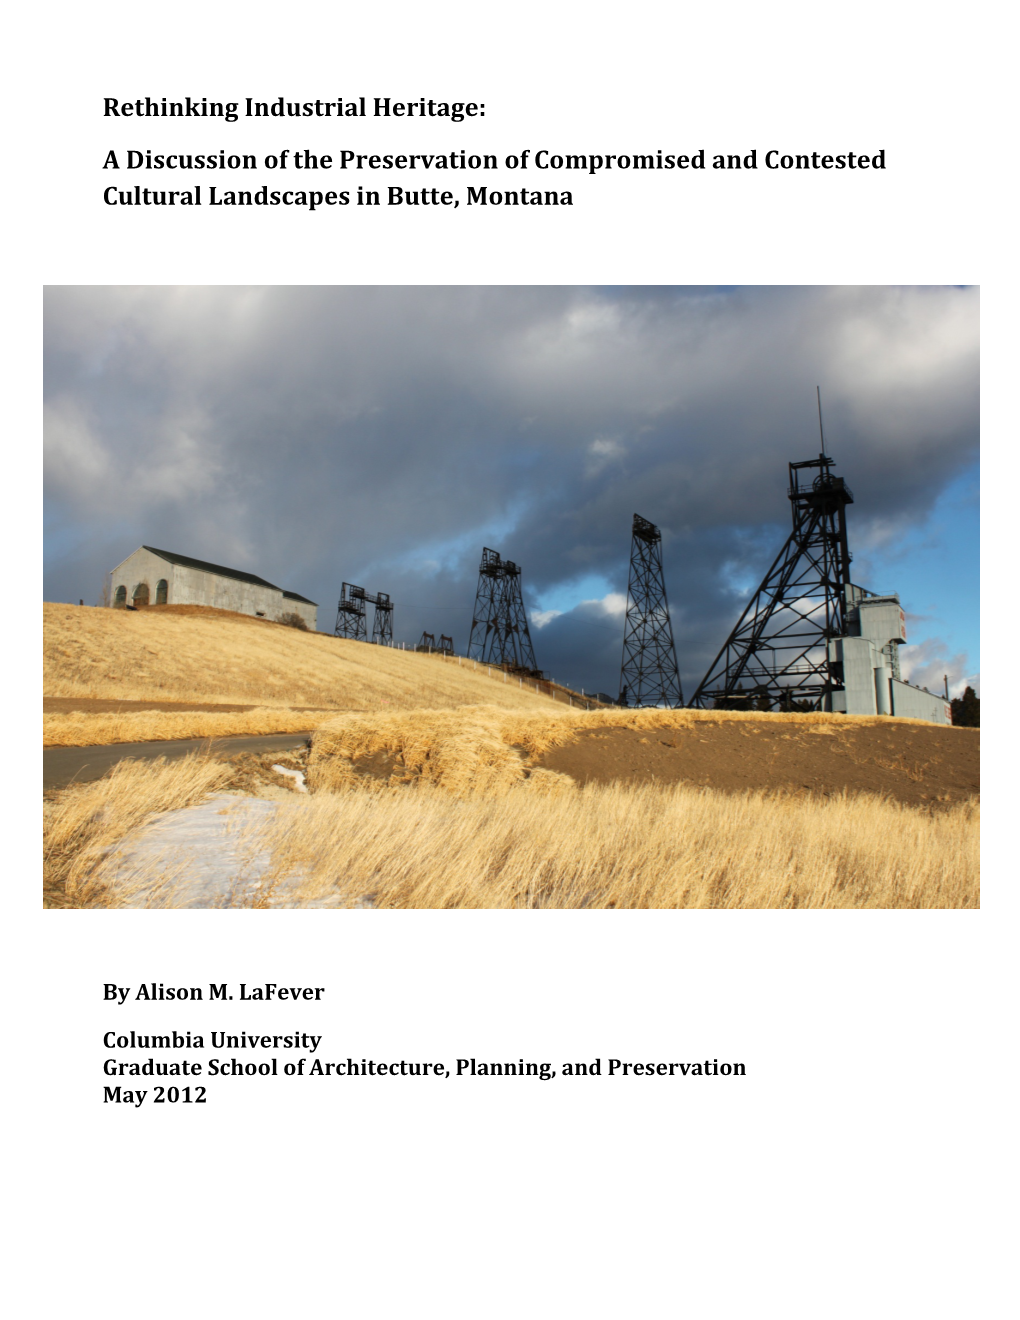 Rethinking Industrial Heritage: a Discussion of the Preservation of Compromised and Contested Cultural Landscapes in Butte, Montana